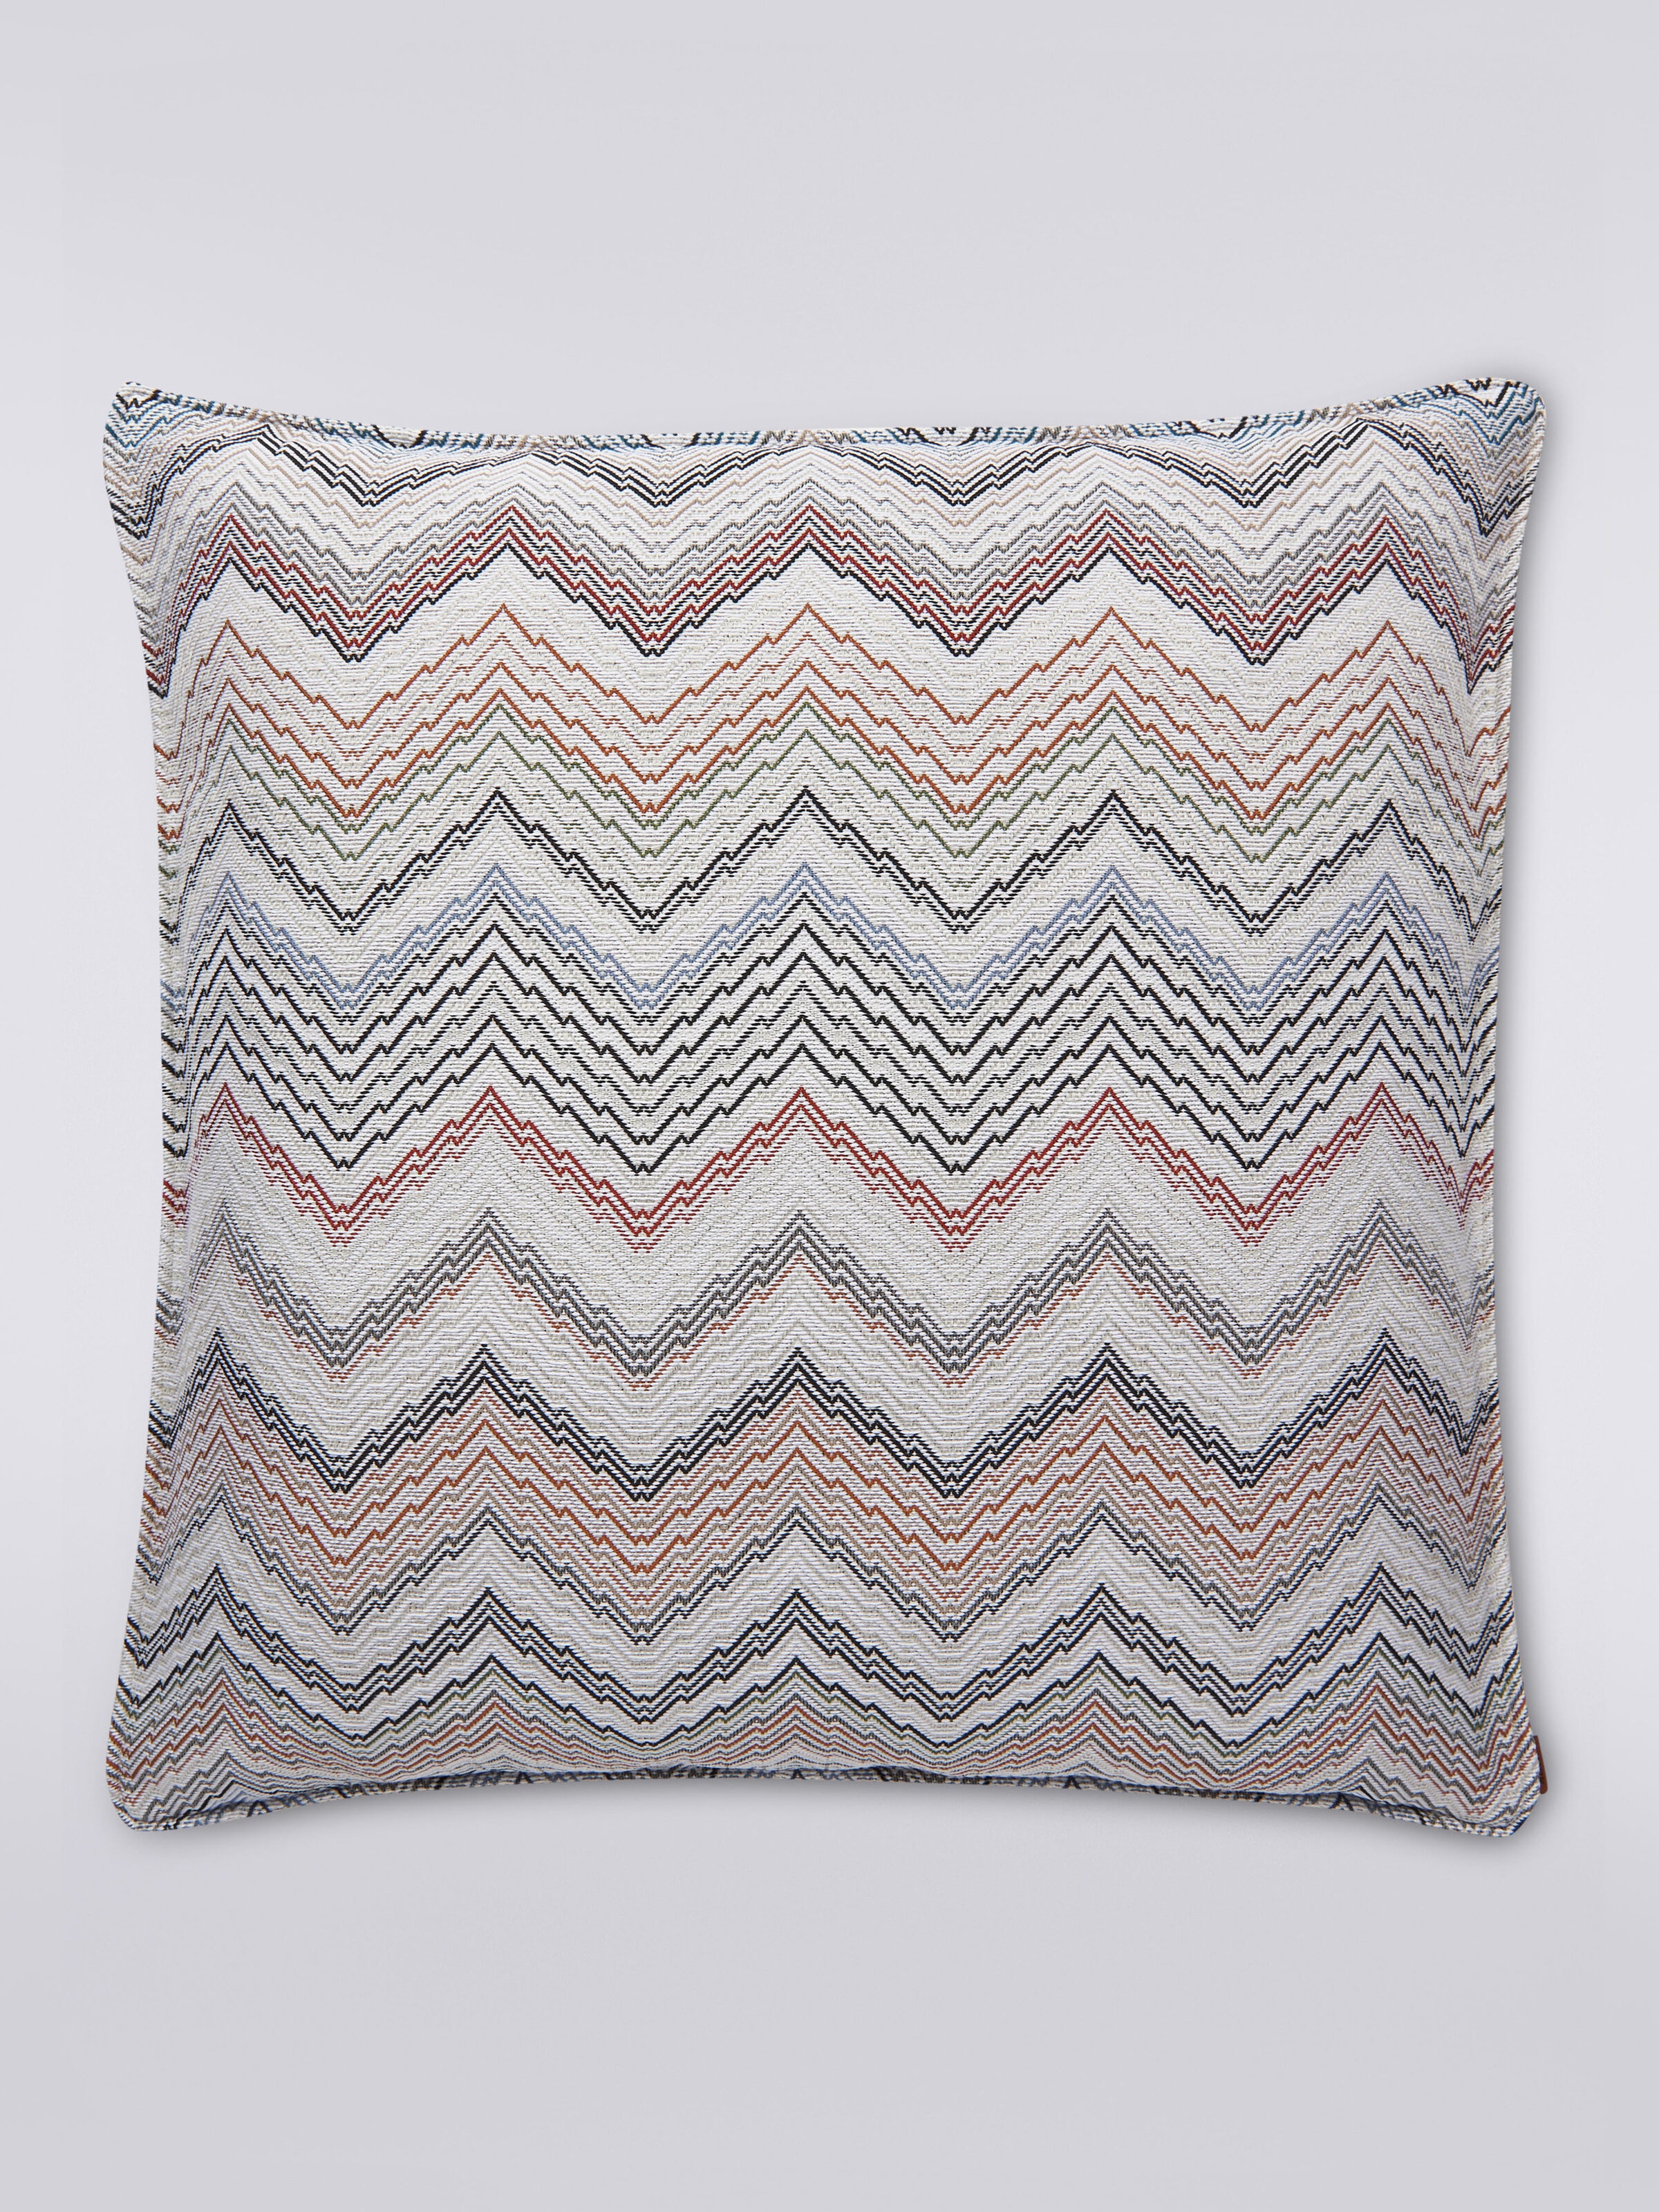 Milano 60x60 cm cushion with knitted effect, White  - 0